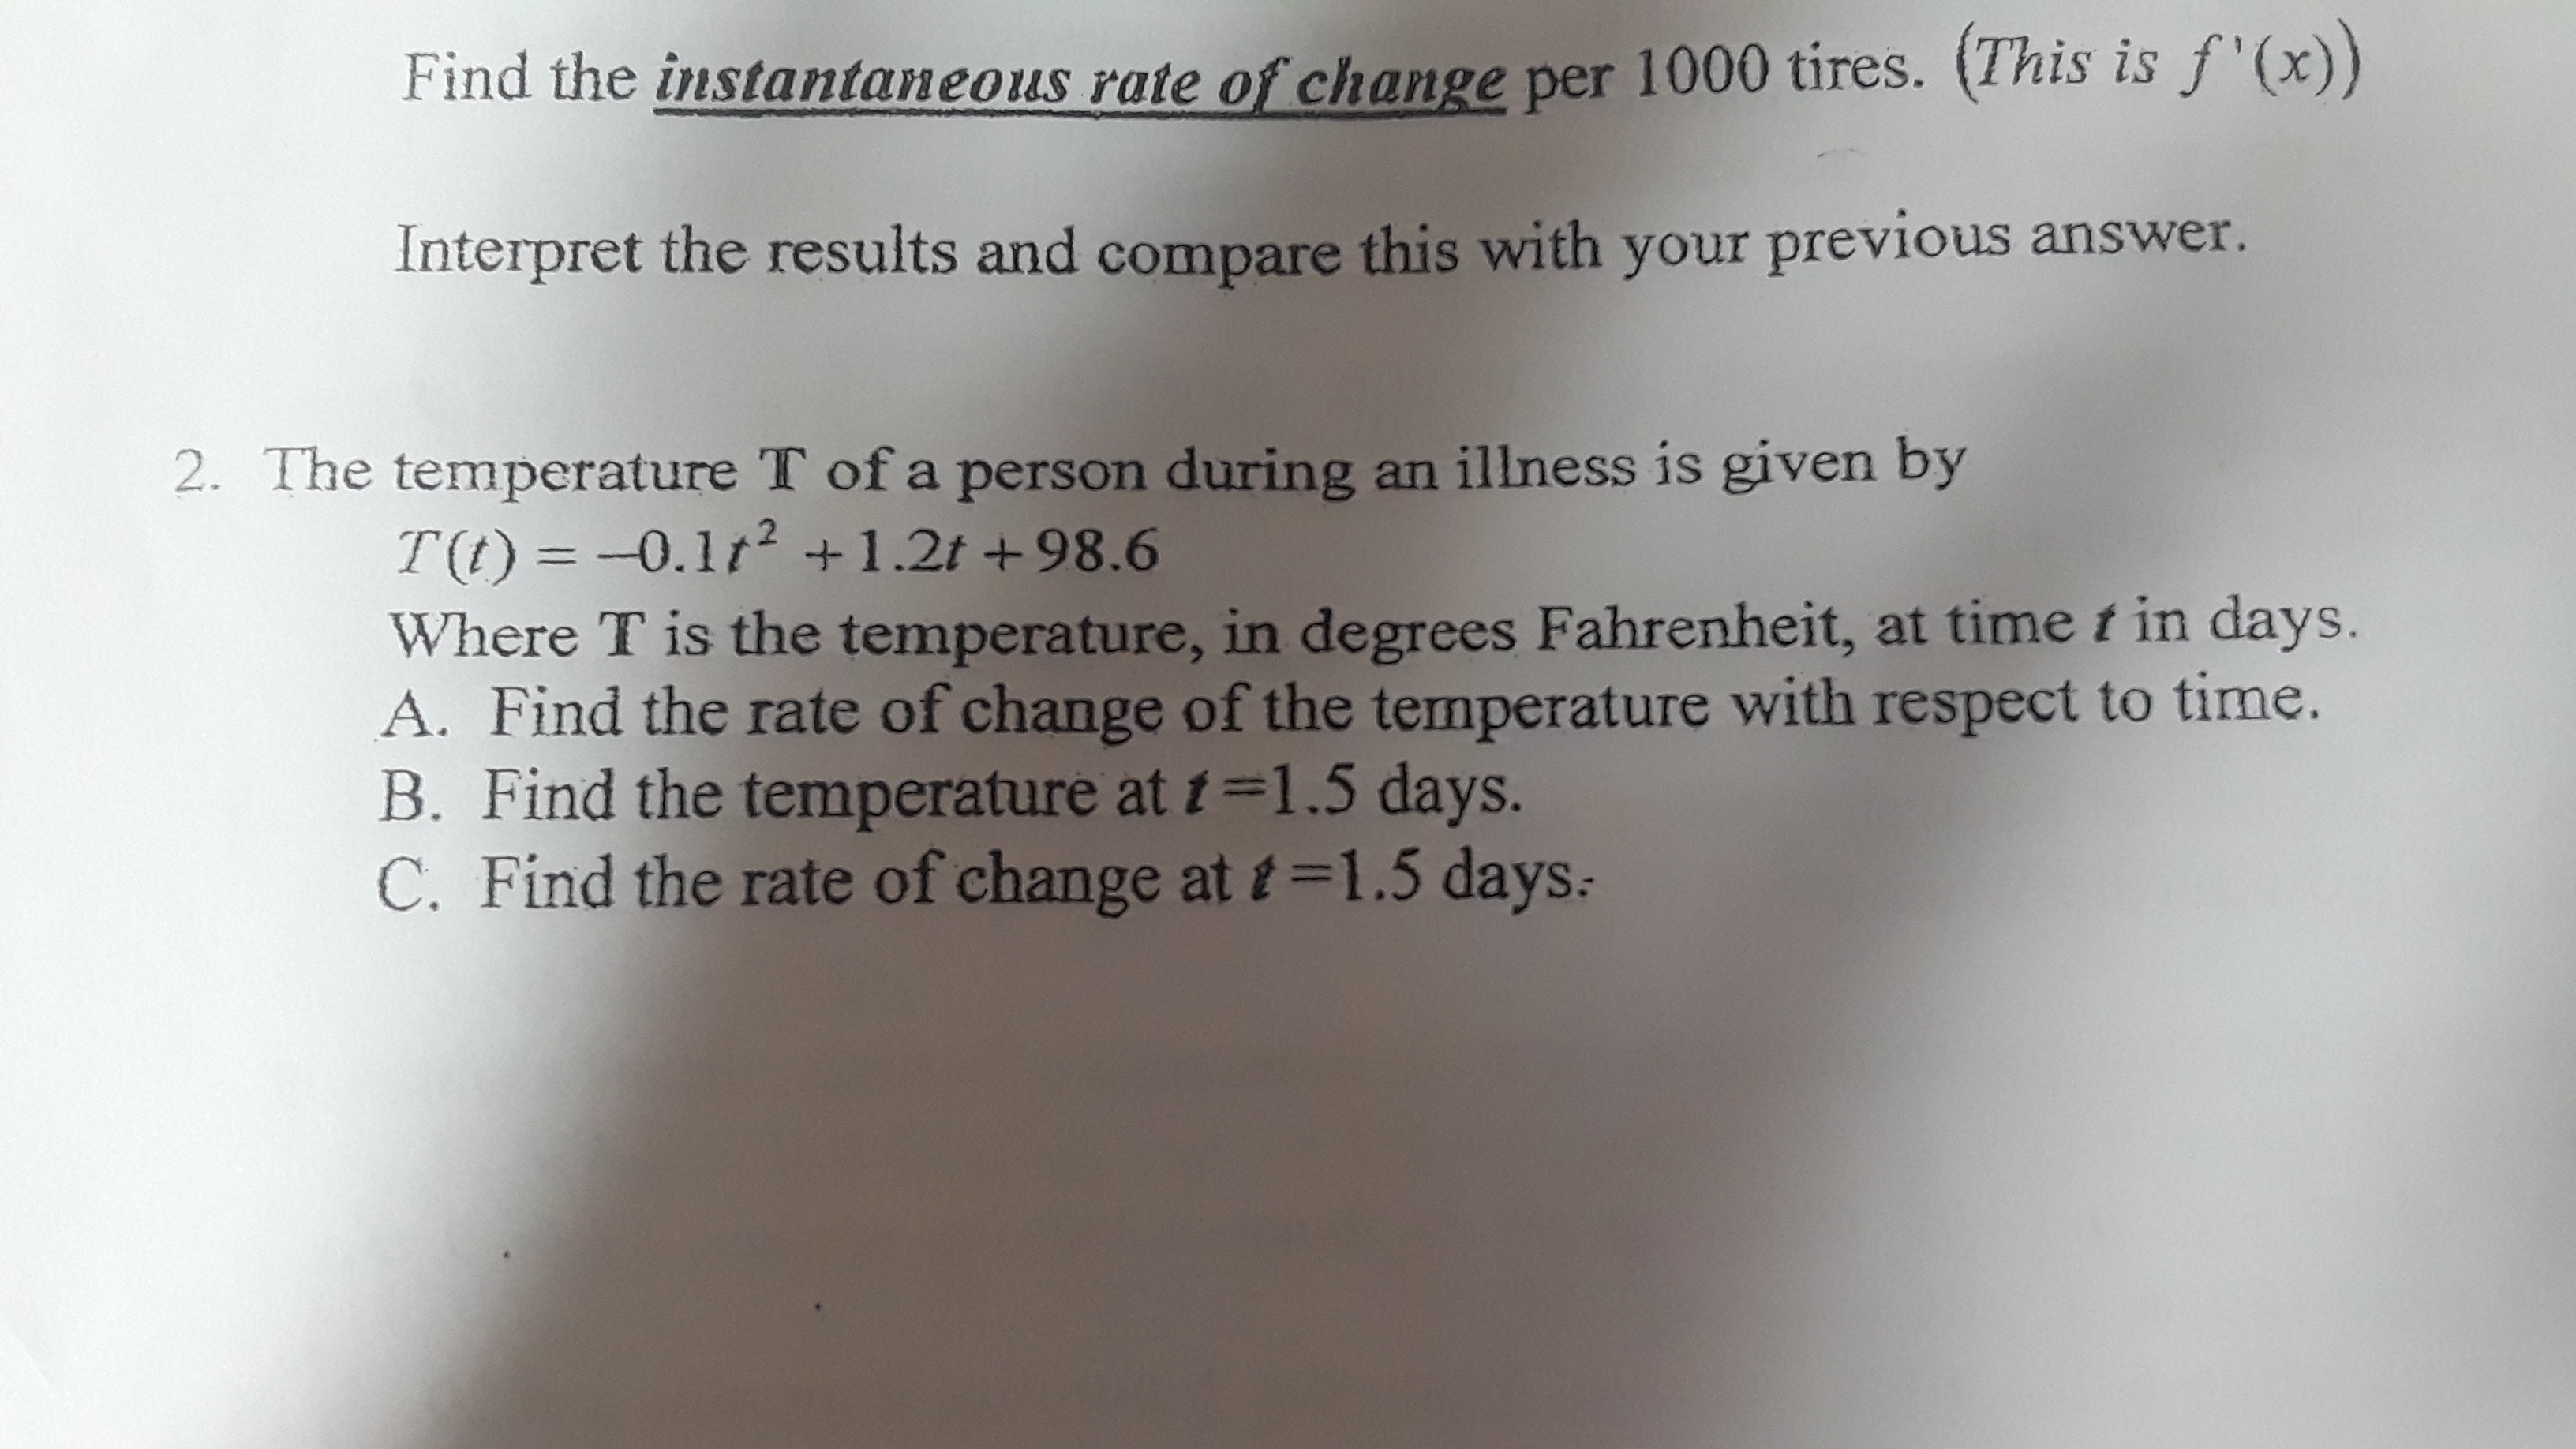 Find the instantaneous rate of change per 1000 tires. (This is f '(x))
Interpret the results and compare this with your previous answer.
2. The temperature T of a person during an illness is given by
T(t) = -0.1t2 +1.2t +98.6
Where T is the temperature, in degrees Fahrenheit, at time t in days.
A. Find the rate of change of the temperature with respect to time.
B. Find the temperature at t=1.5 days.
C. Find the rate of change at t=1.5 days:
